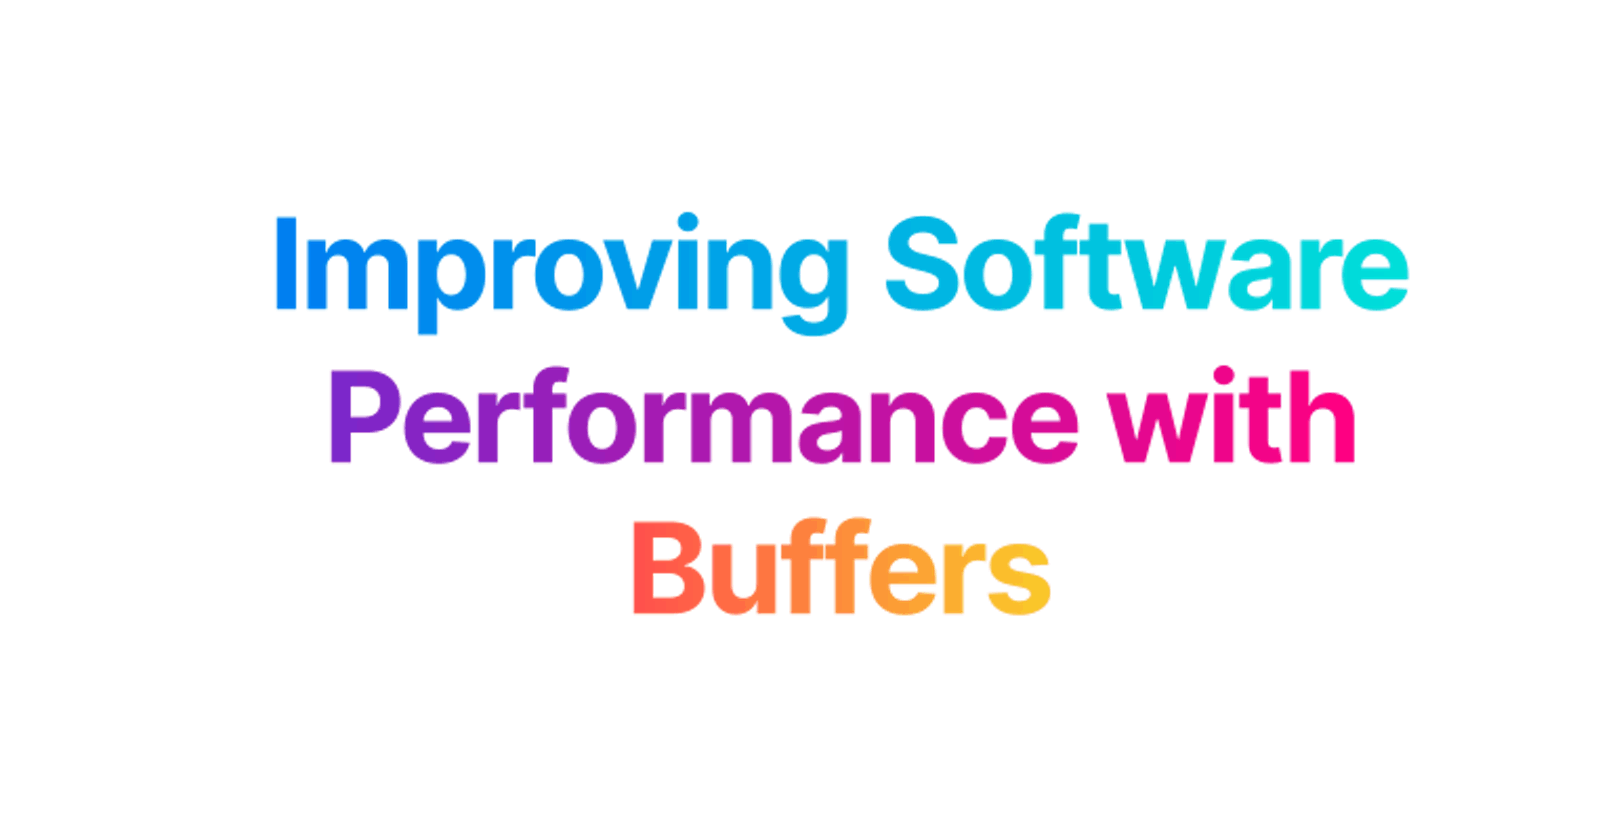 Improving Software Performance with Buffers